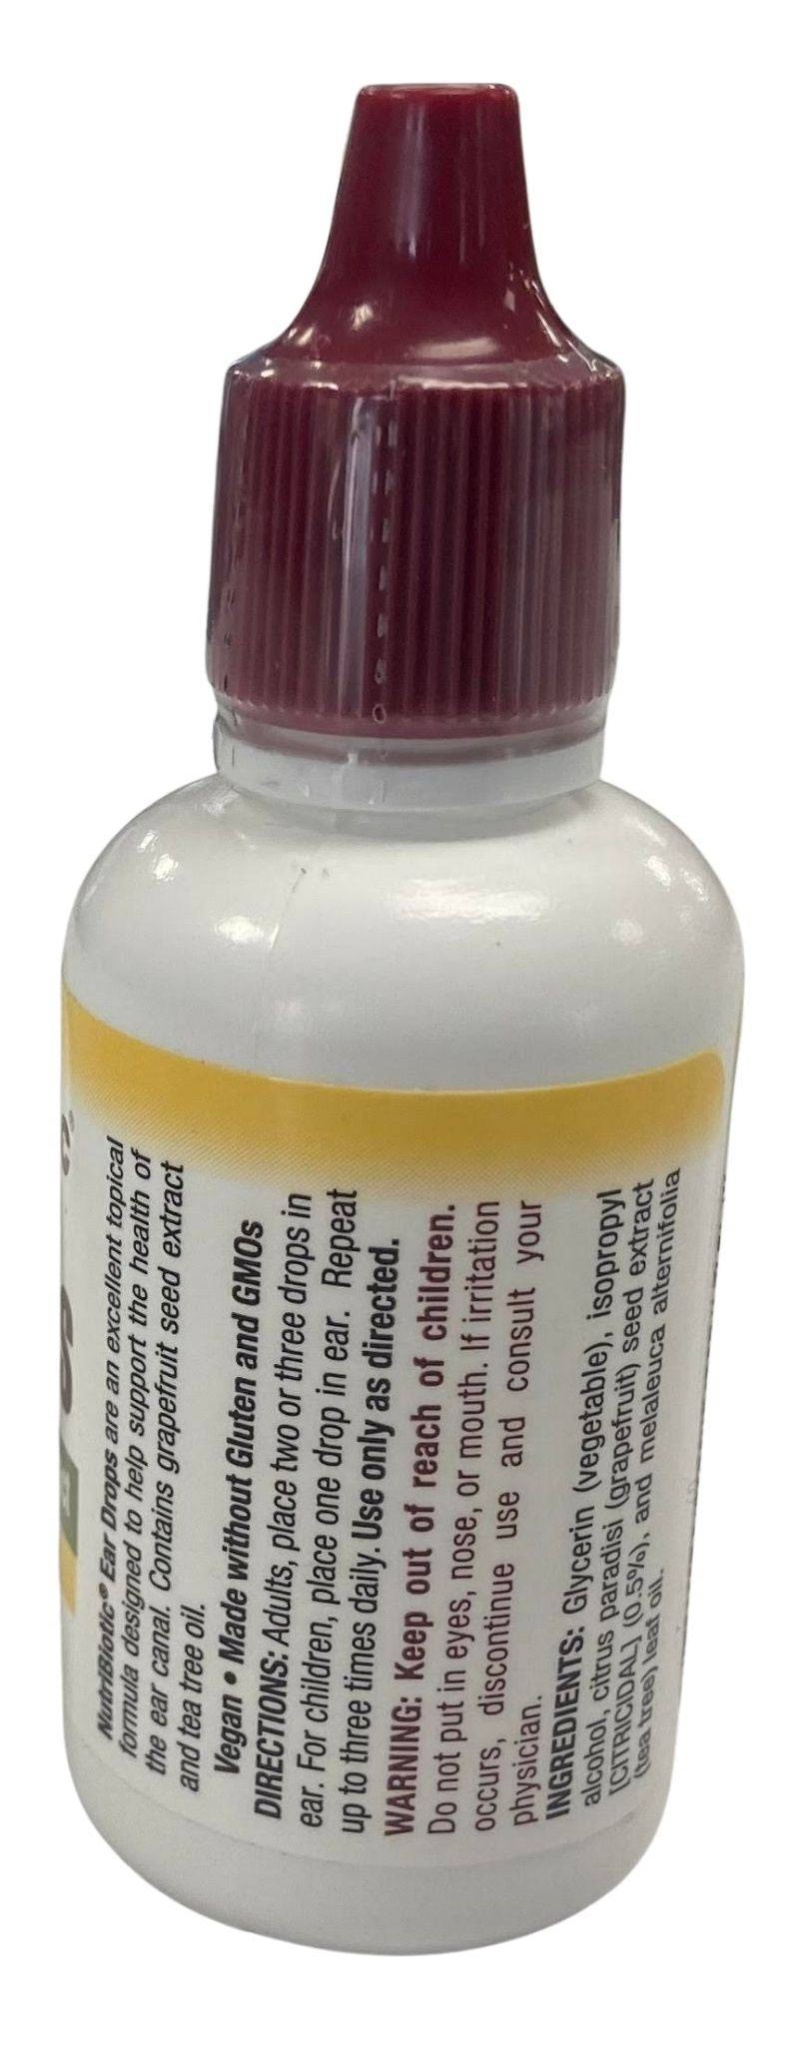 Grapefruit Seed Extract Ear Drops - 1 Oz